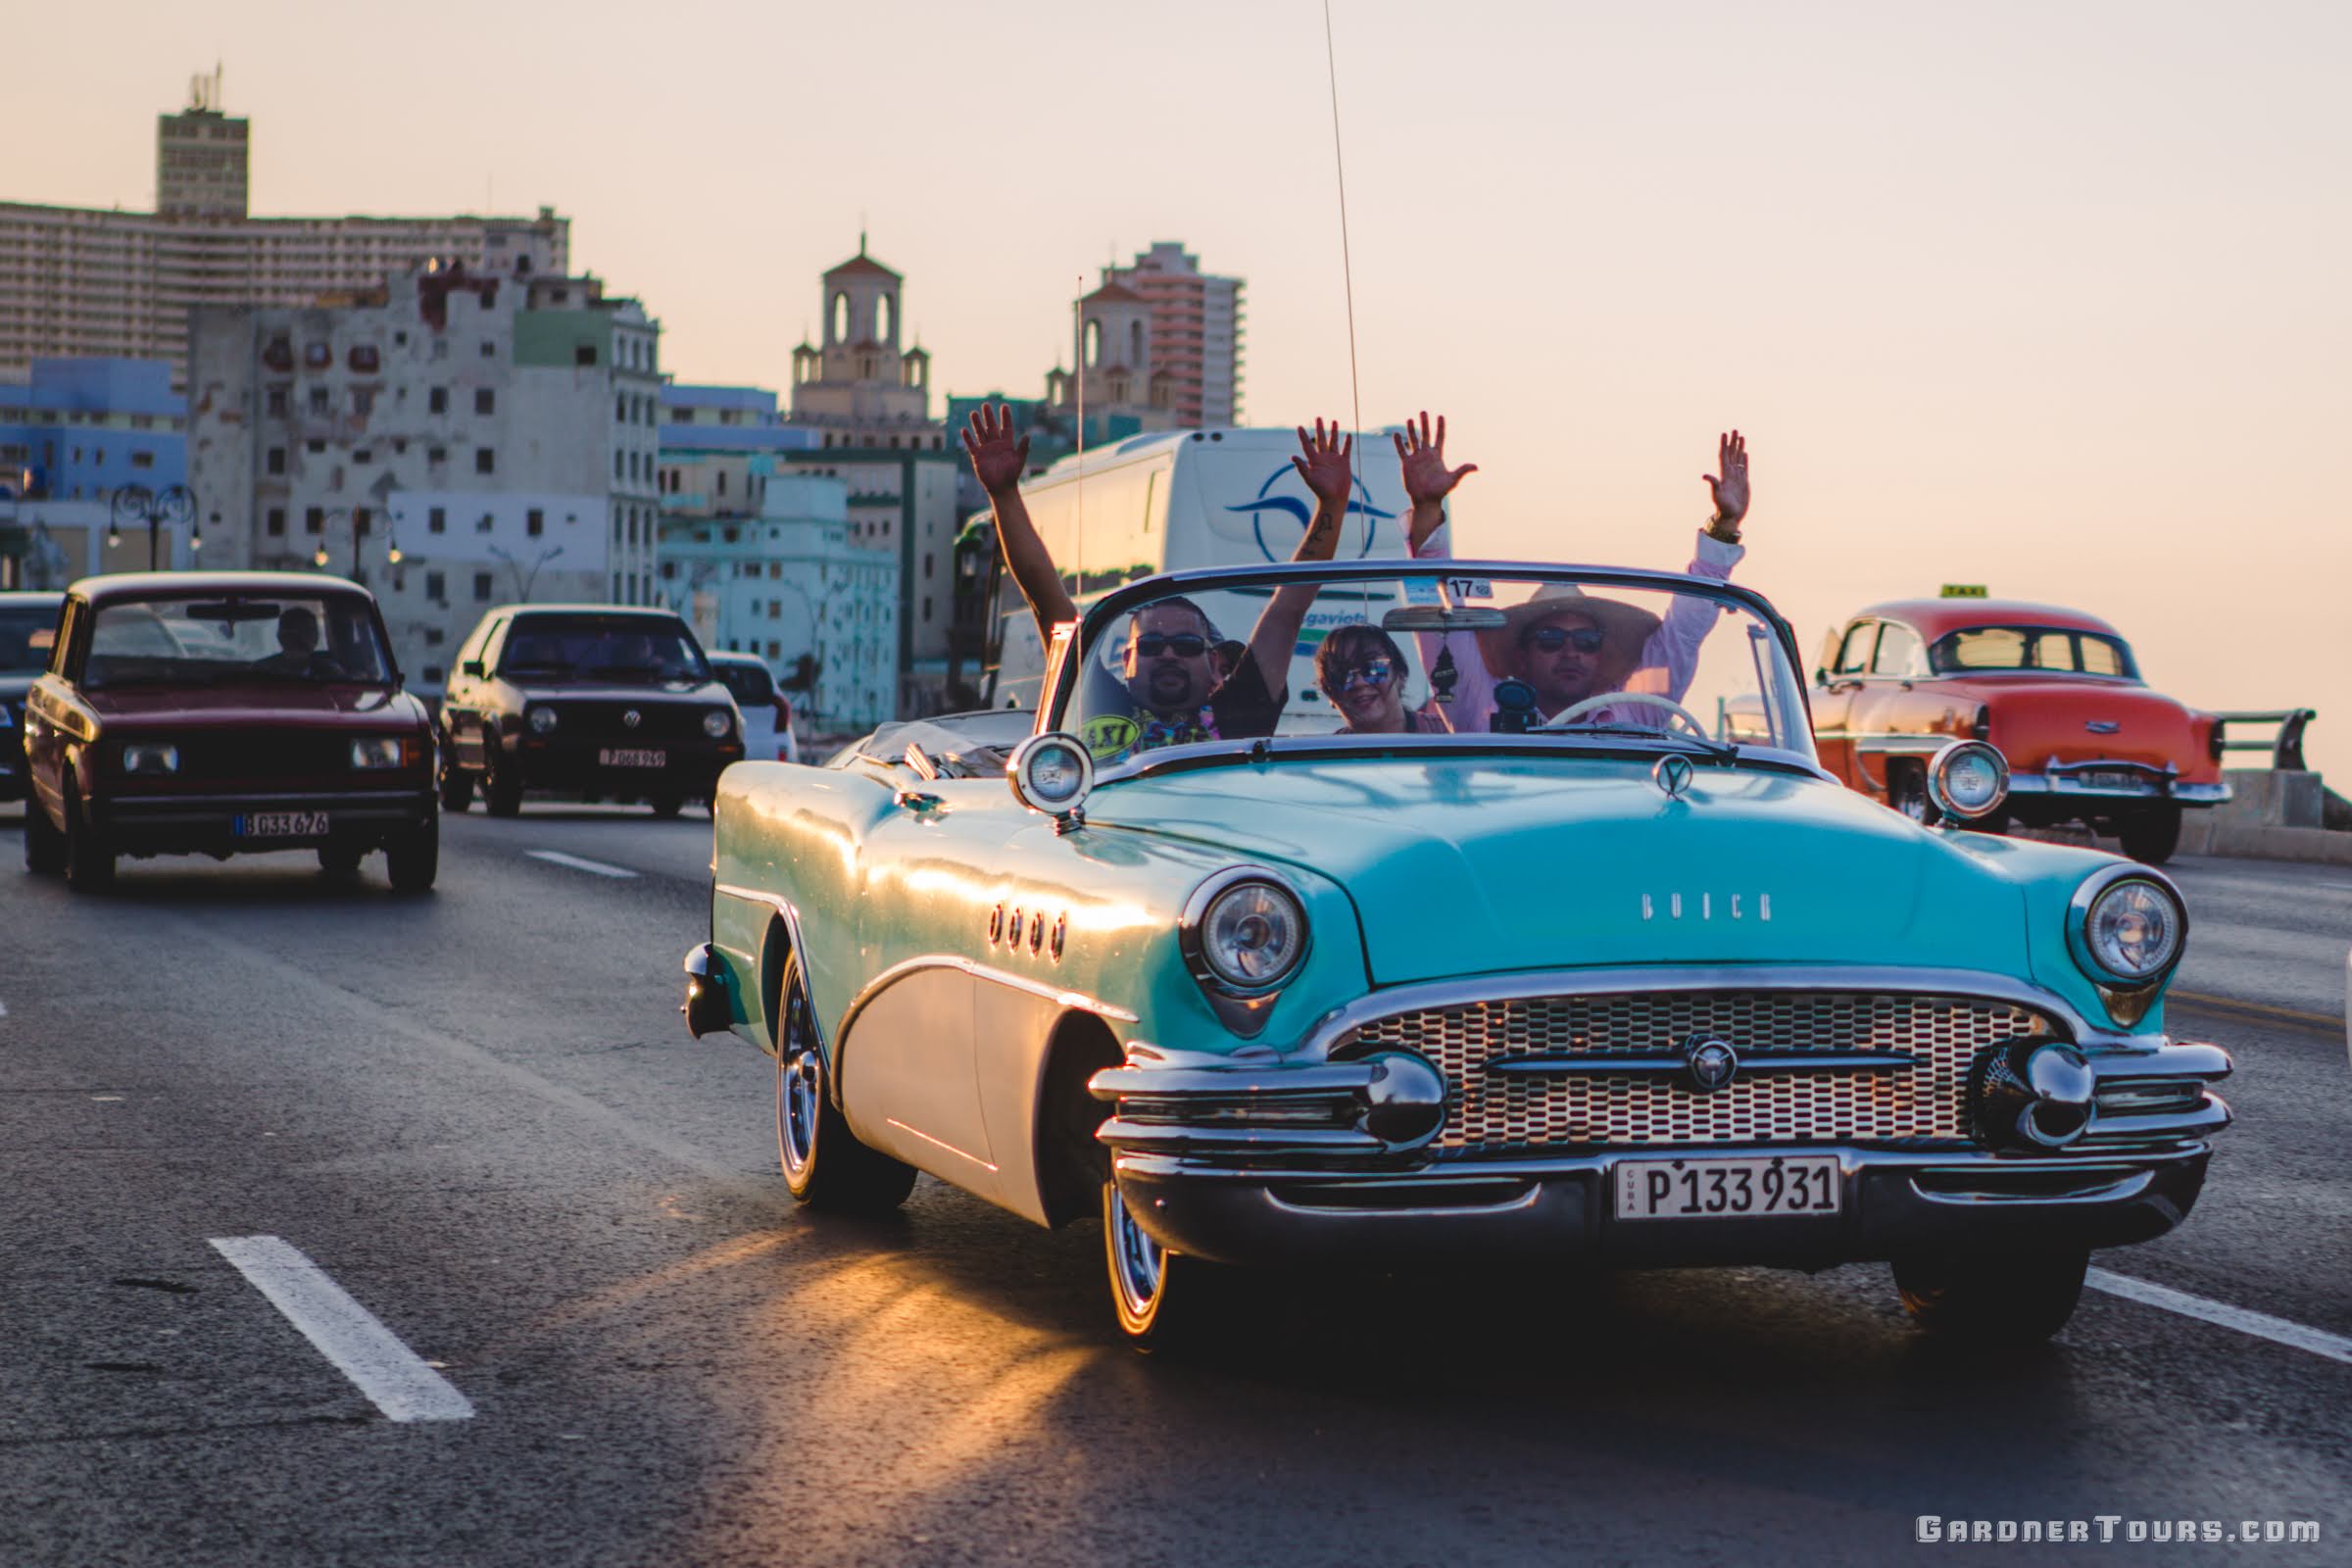 Friends Riding in Blue Buick Classic Car with their Hands Up in Havana, Cuba